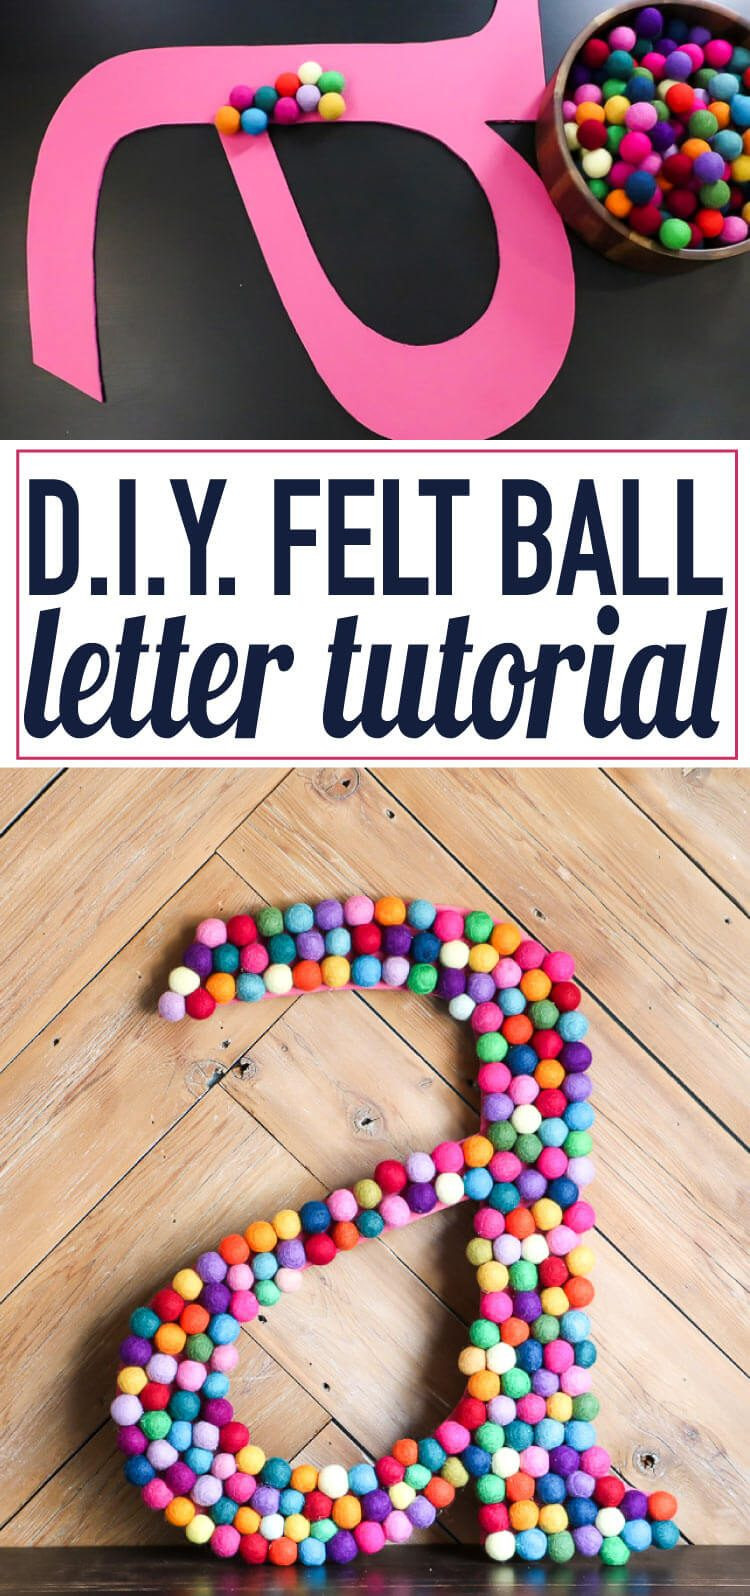 Decorative Letters DIY
 How to Make Decorative Letters for Your Walls